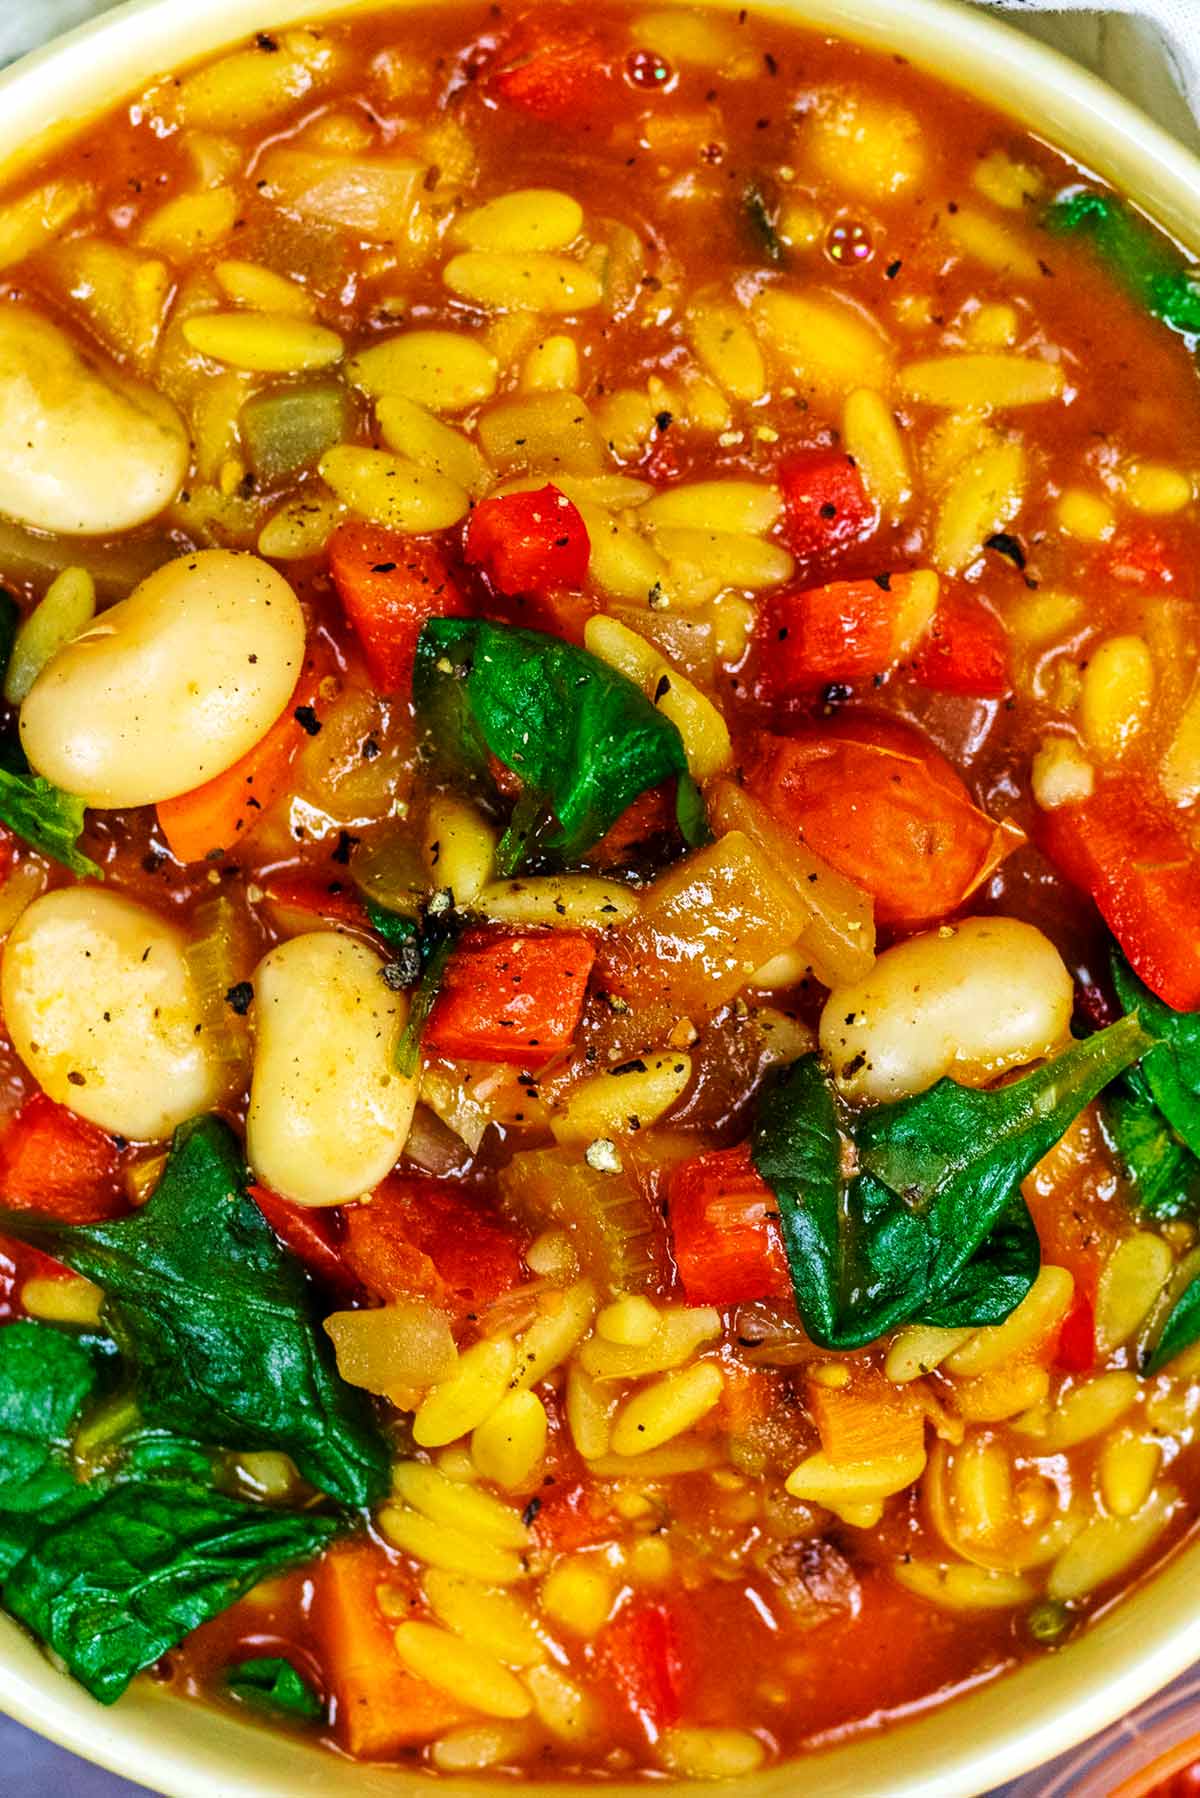 Beans, vegetables, spinach and orzo in a bowl of soup.